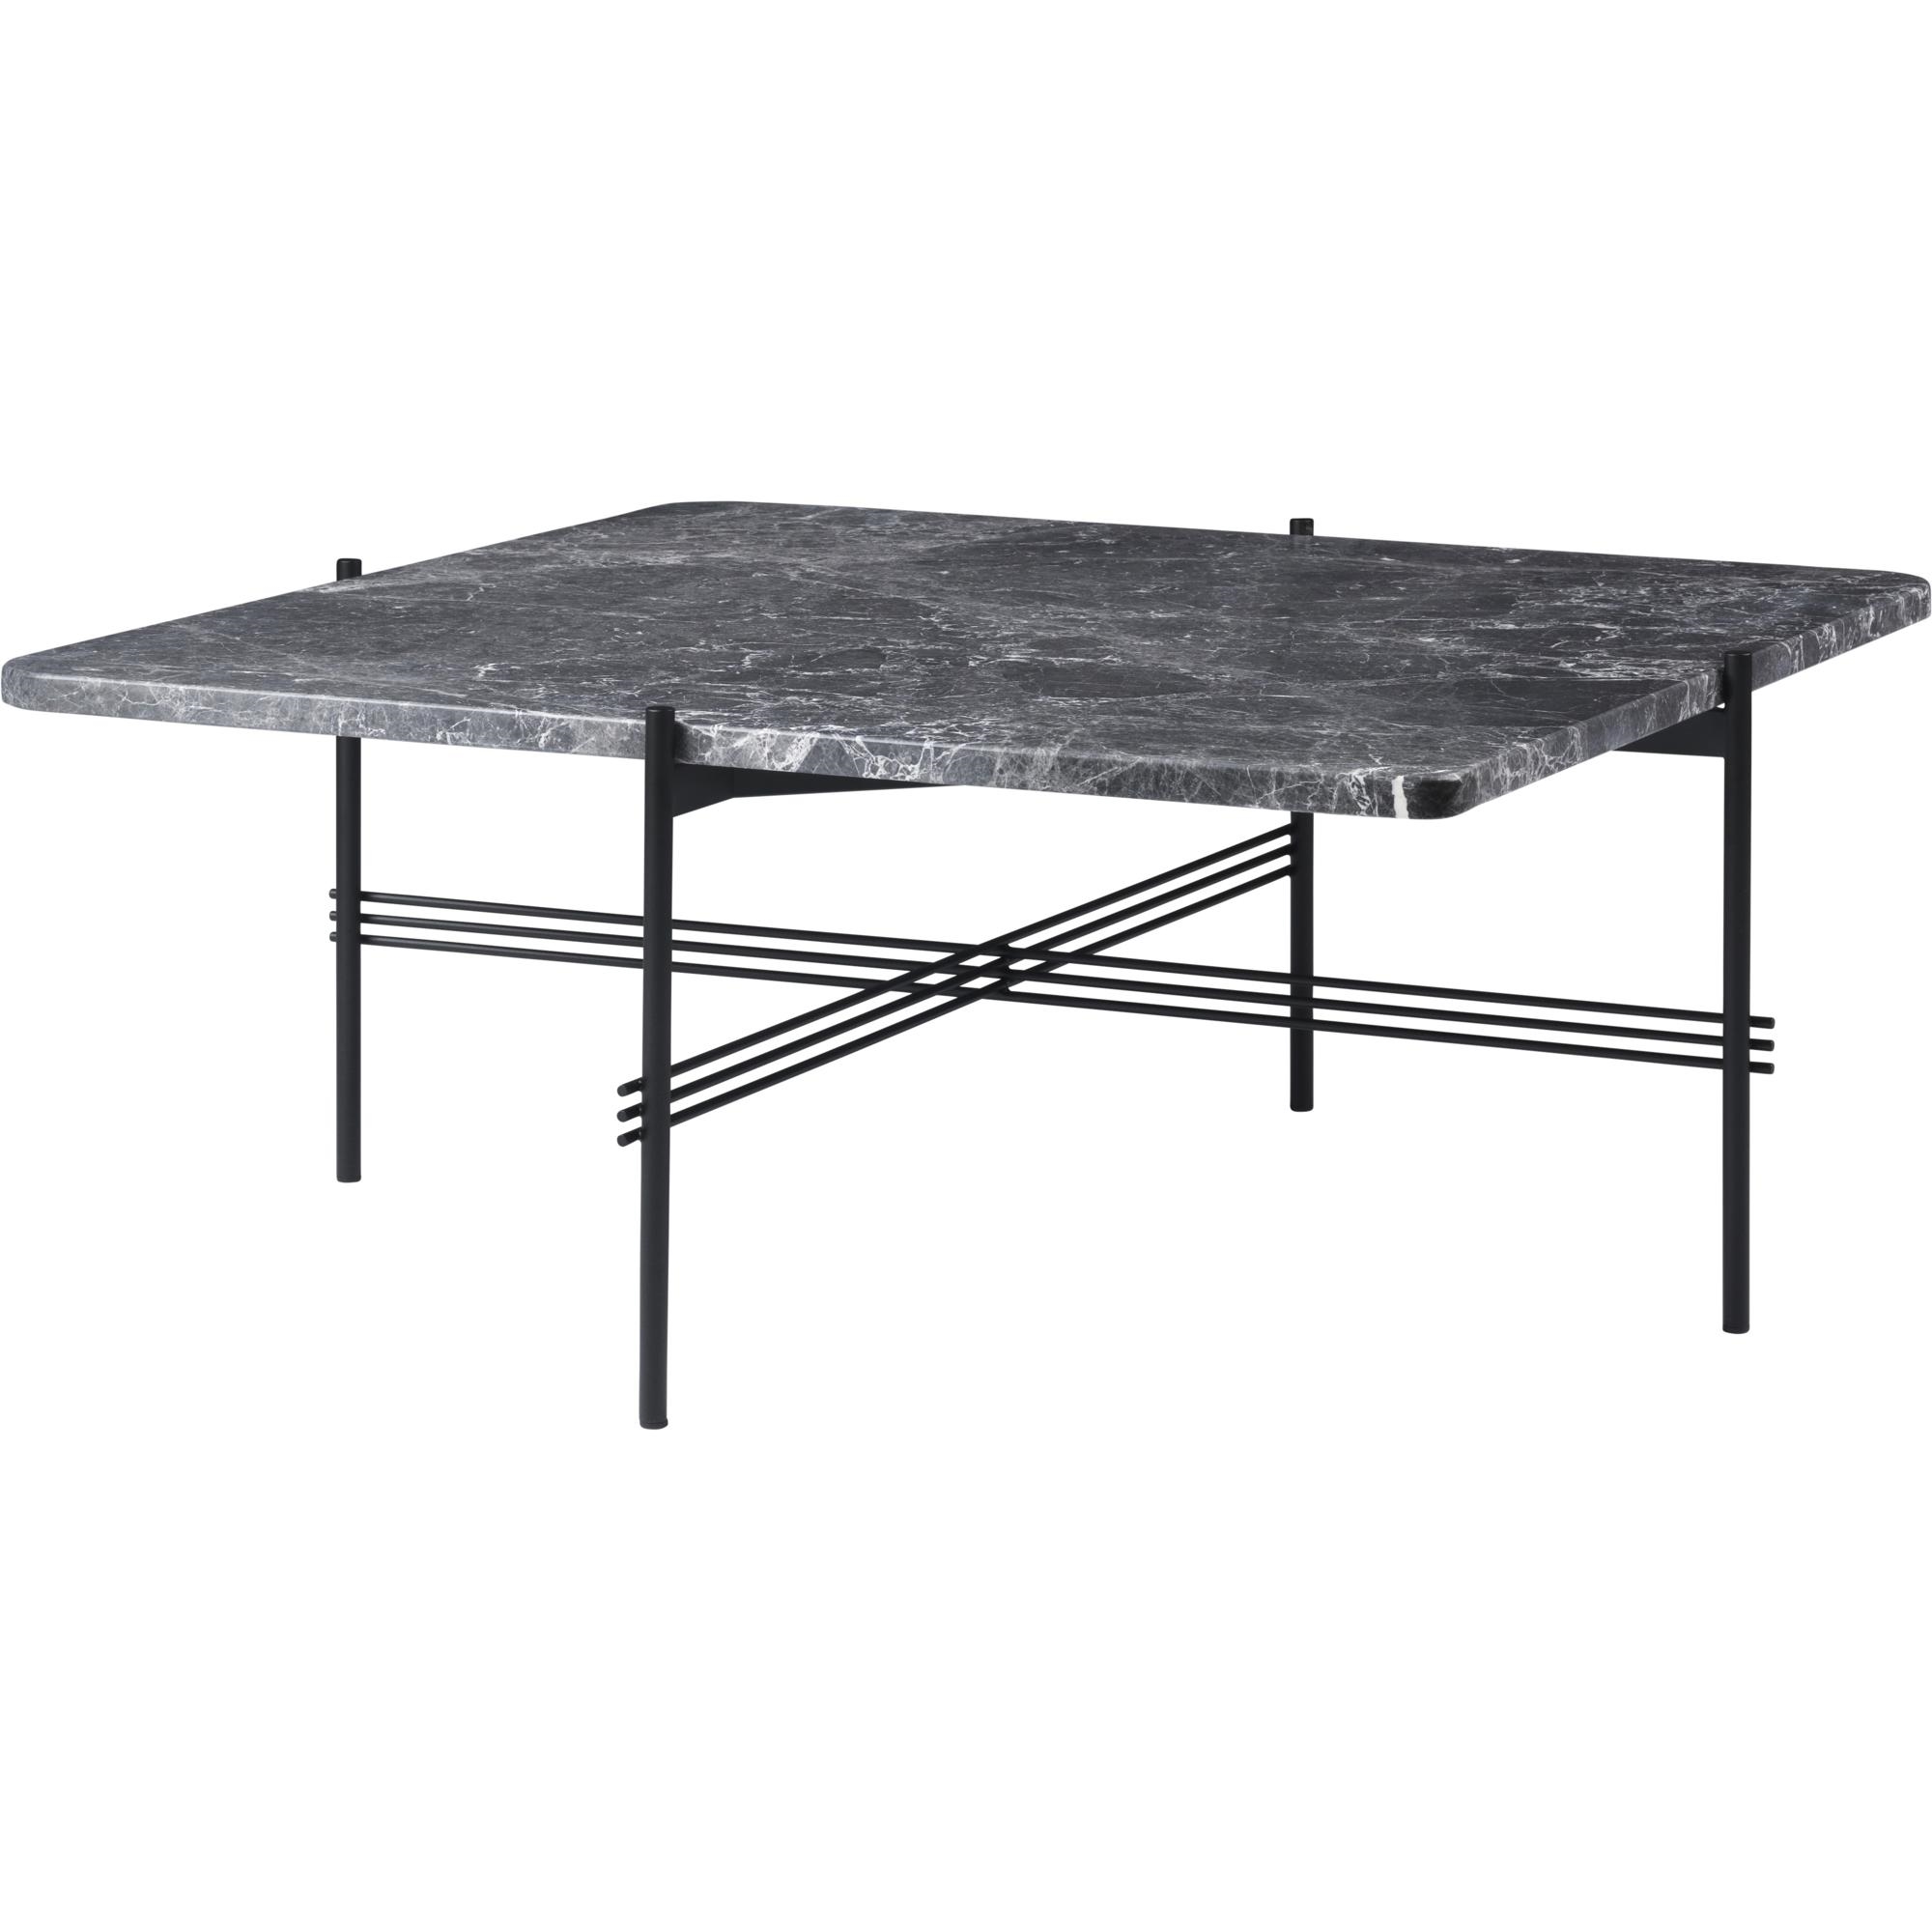 GUBI TS Coffee Table Square 80 x 80 cm w. Black Base and Gray Emperador Marble Top